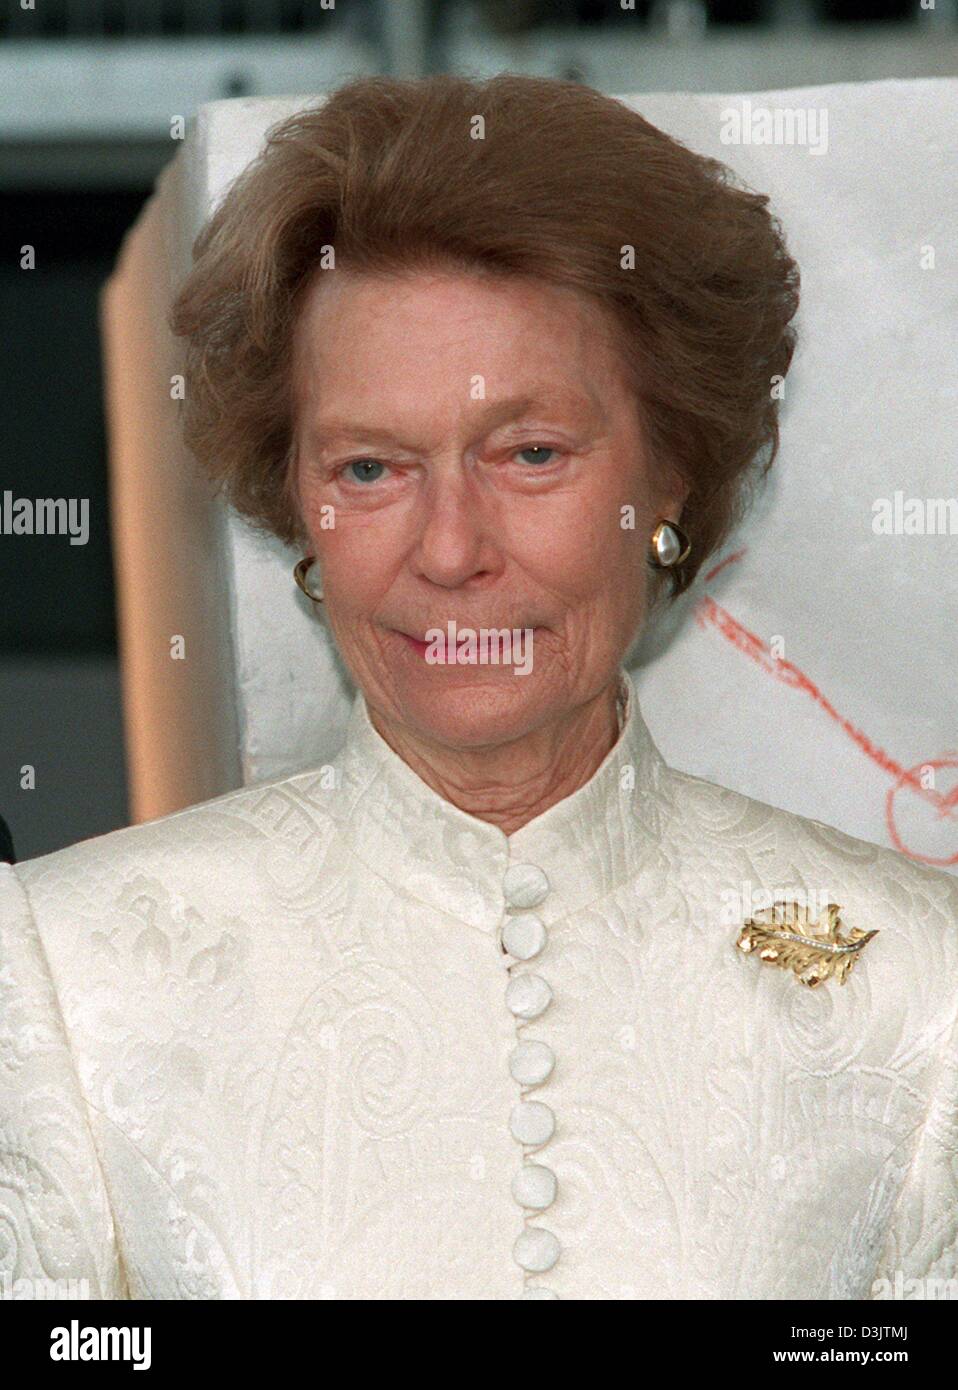 (dpa files) - The photo shows Grand duchess Josephine Charlotte while visiting the world exhibition Expo 2000 in Hanover, Germany, 15 July 2000. The Luxembourg court announced that the mother of head of state Grand duke Henri died on Monday morning (10 January 2005) at the age of 77 at the Fischbach castle. She had been suffering for the last two years from a lung tumour. Josephine Stock Photo